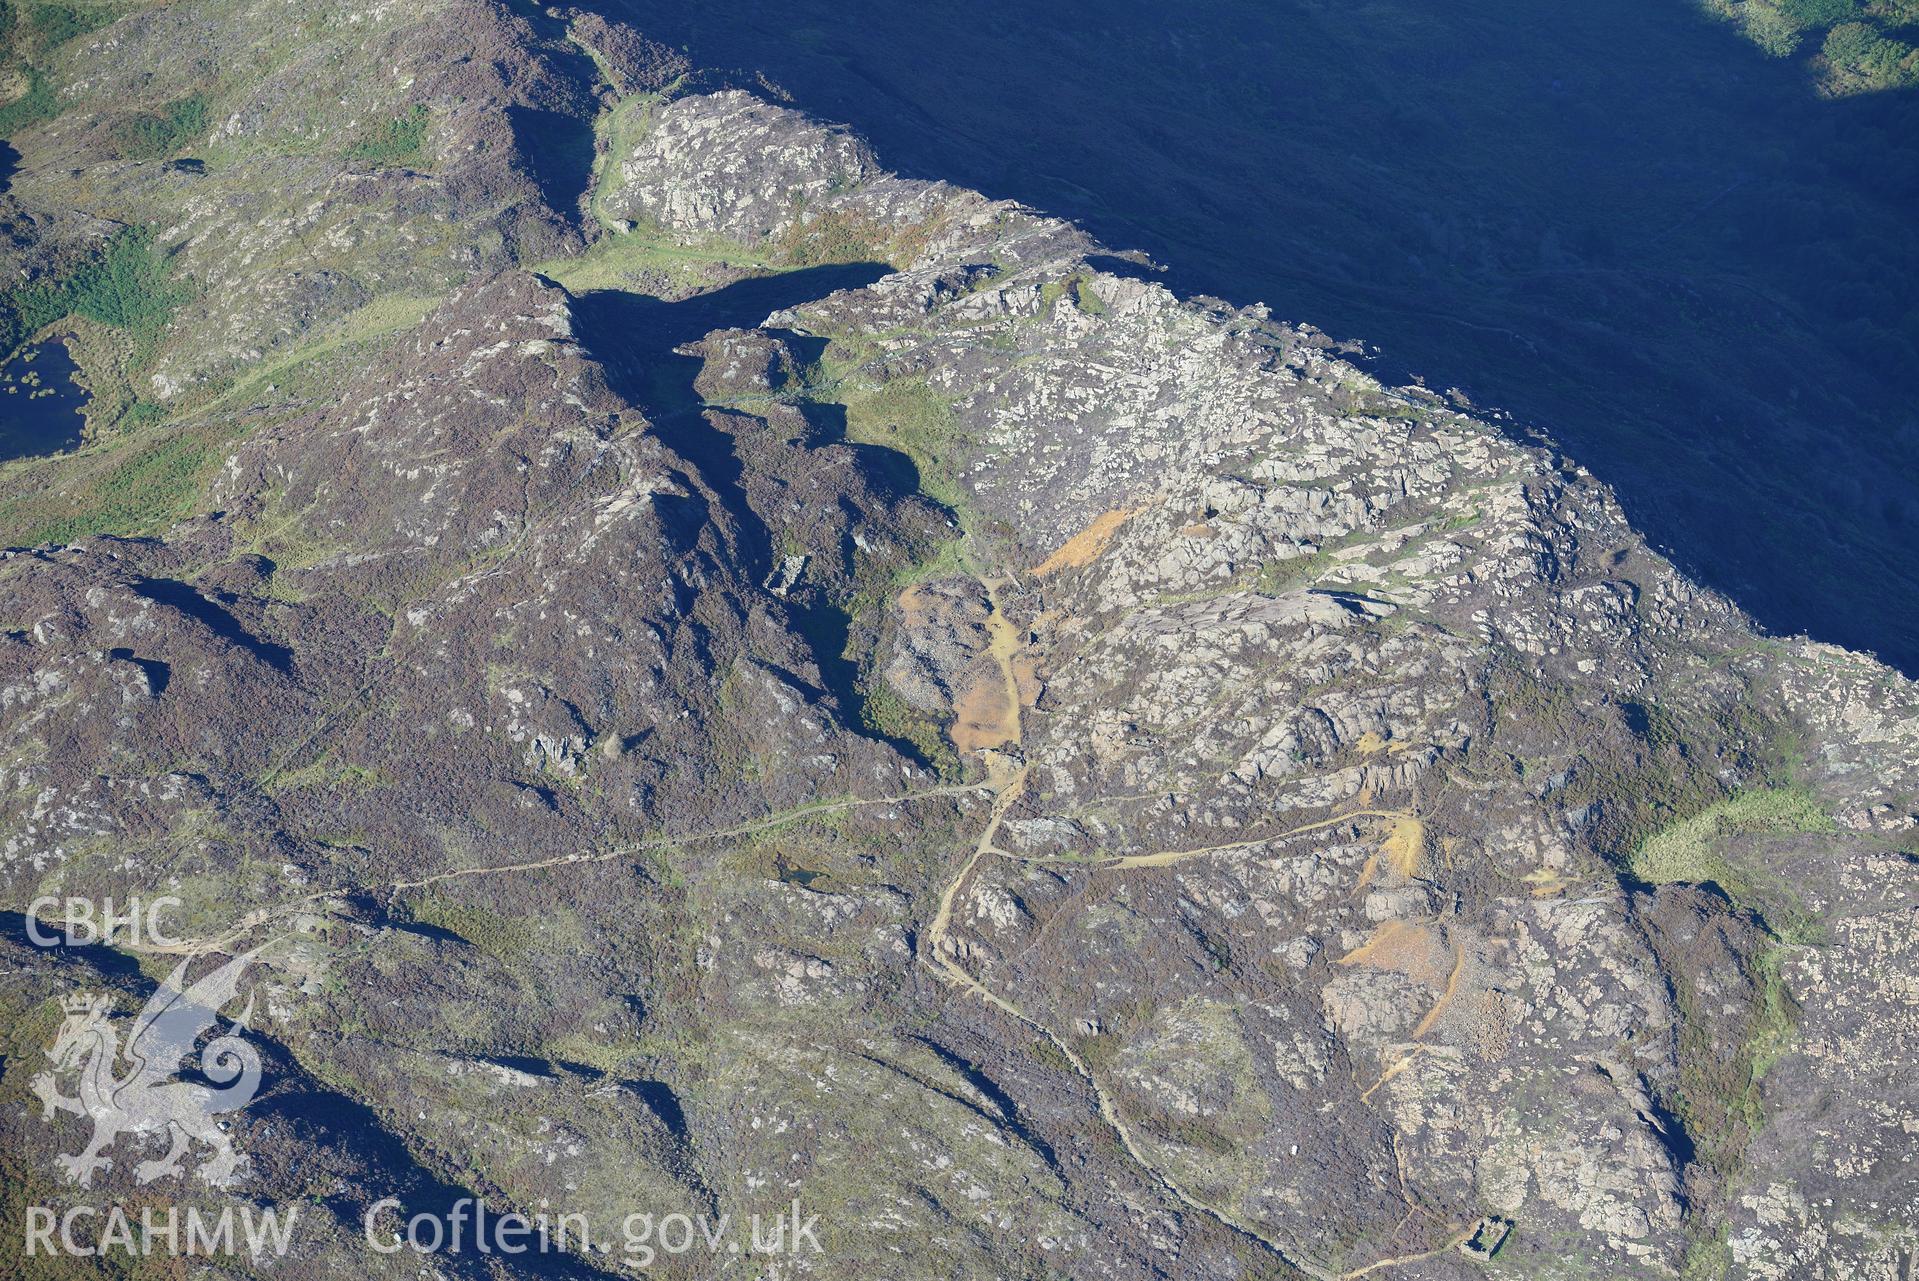 Llwyndu copper mine, west of Beddgelert. Oblique aerial photograph taken during the Royal Commission's programme of archaeological aerial reconnaissance by Toby Driver on 2nd October 2015.